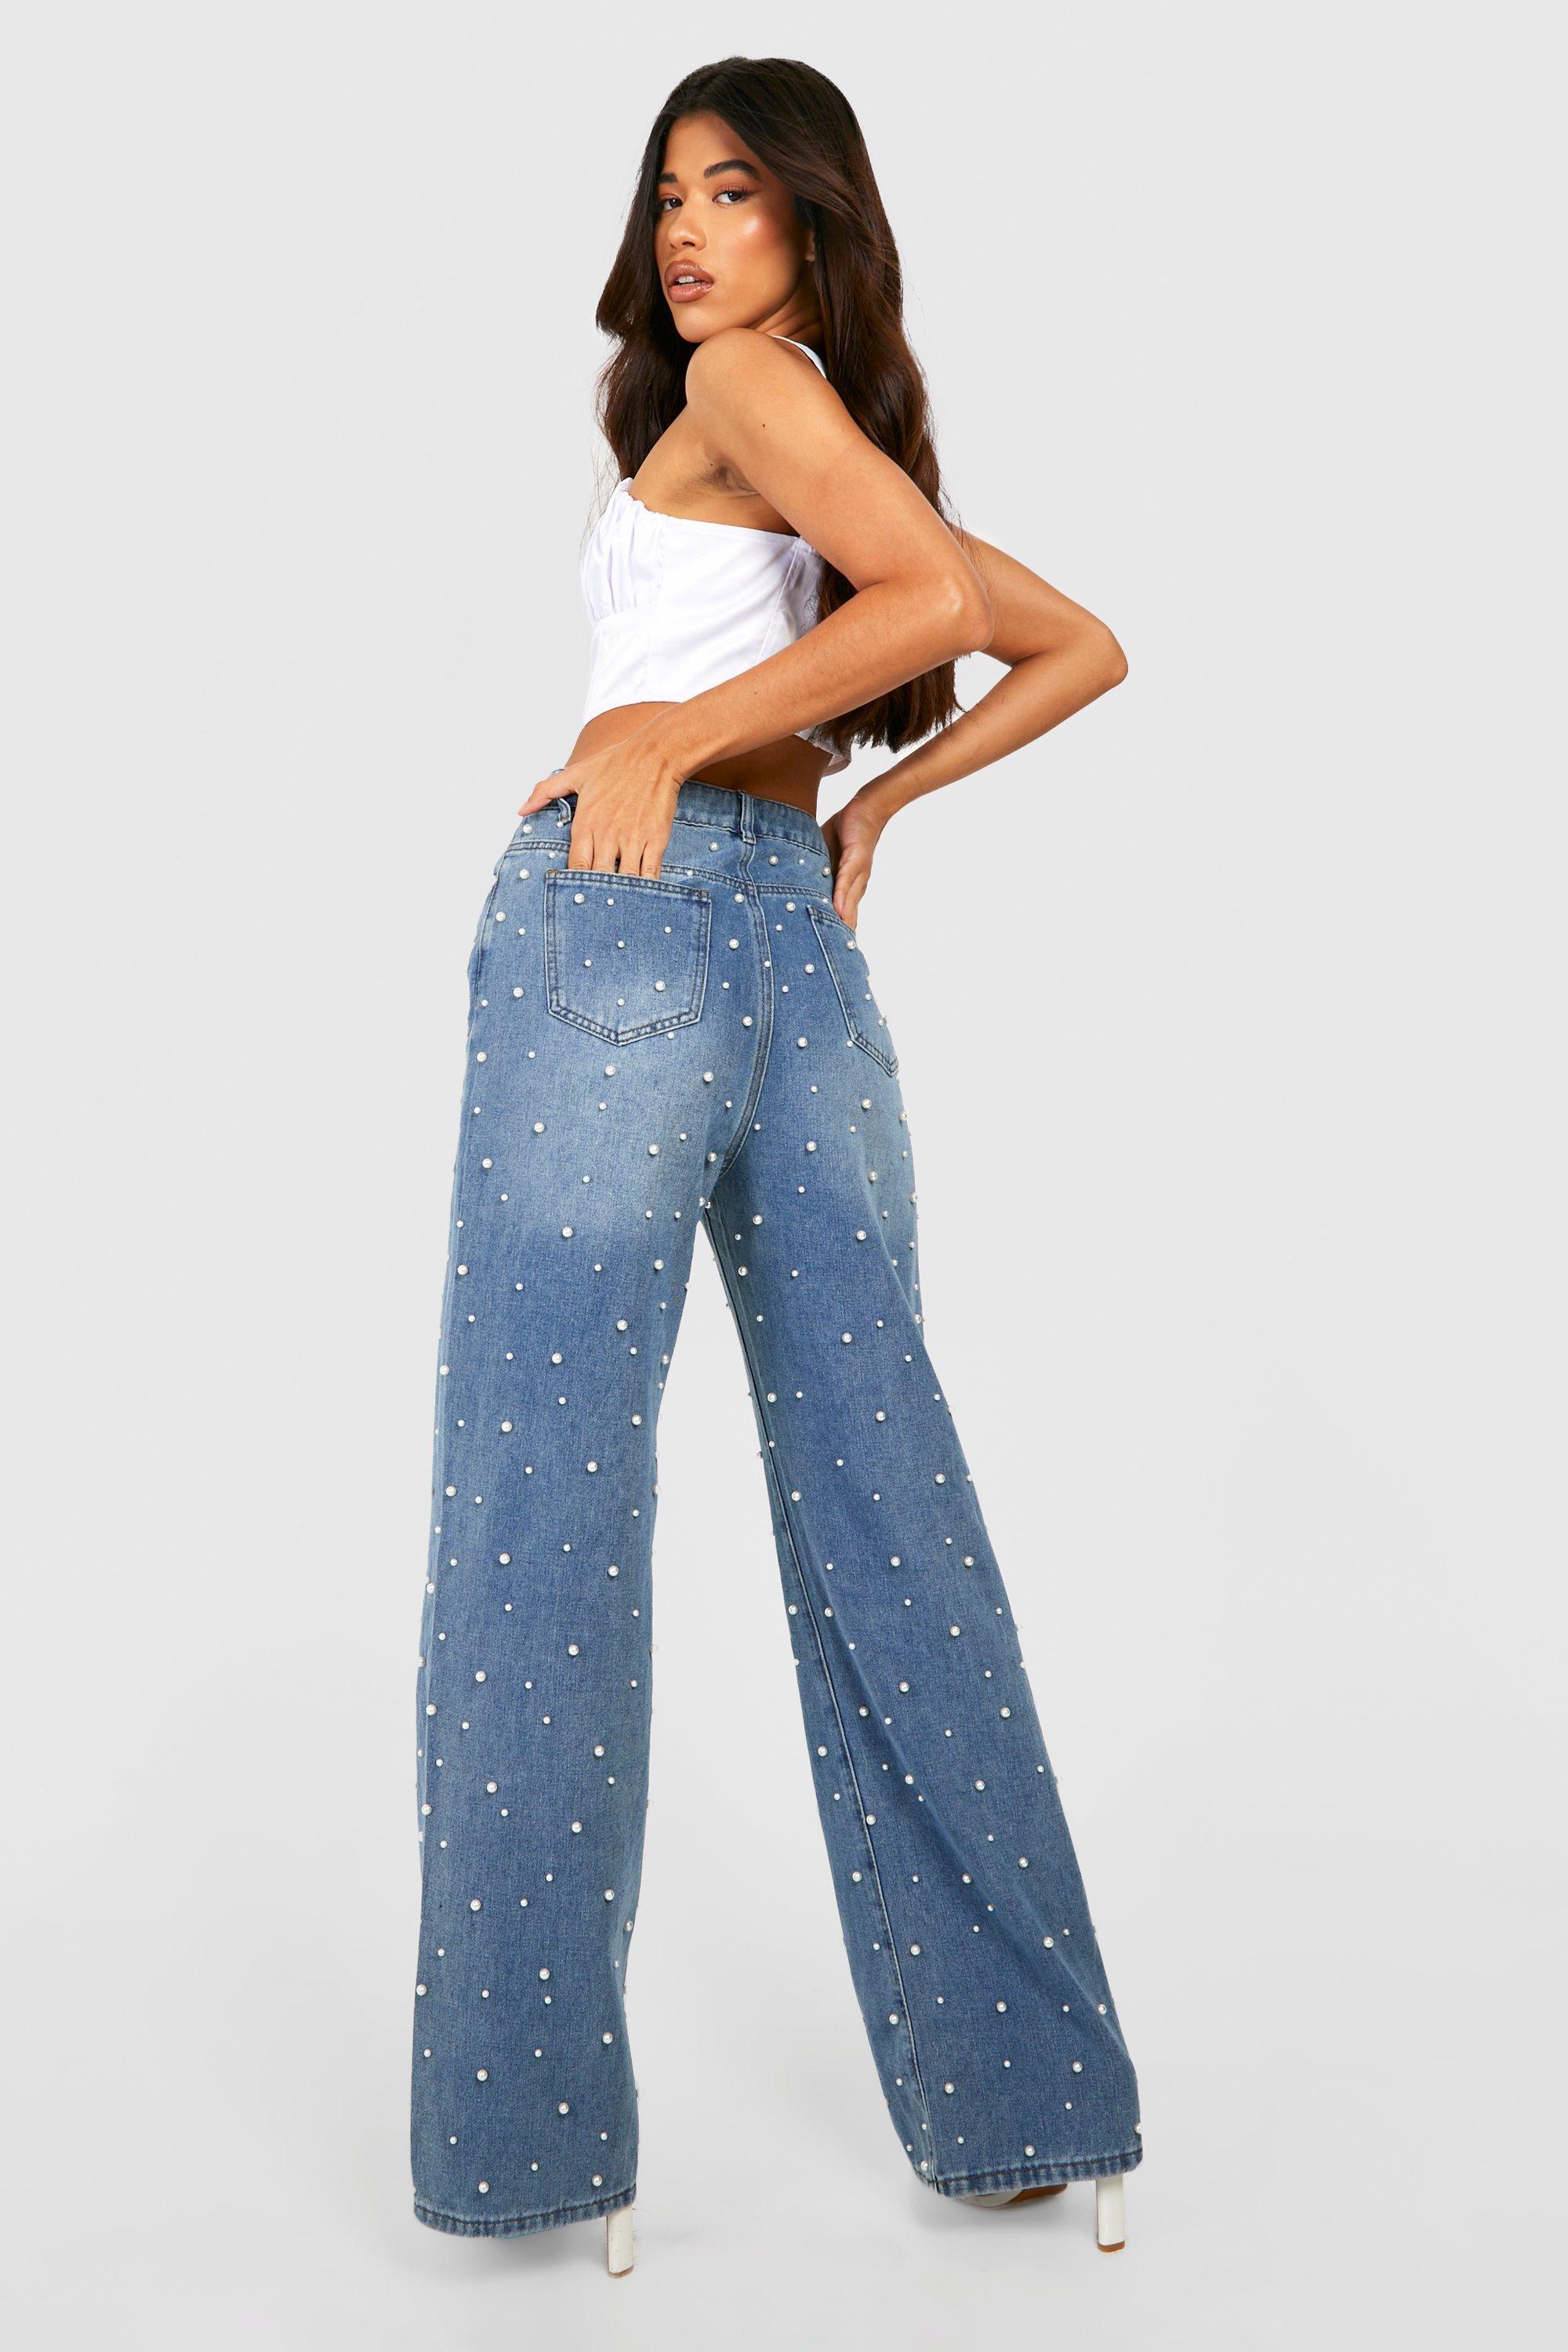 Boohoo Tall Pearl Embellished Mid Rise Jeans in Blue | Lyst